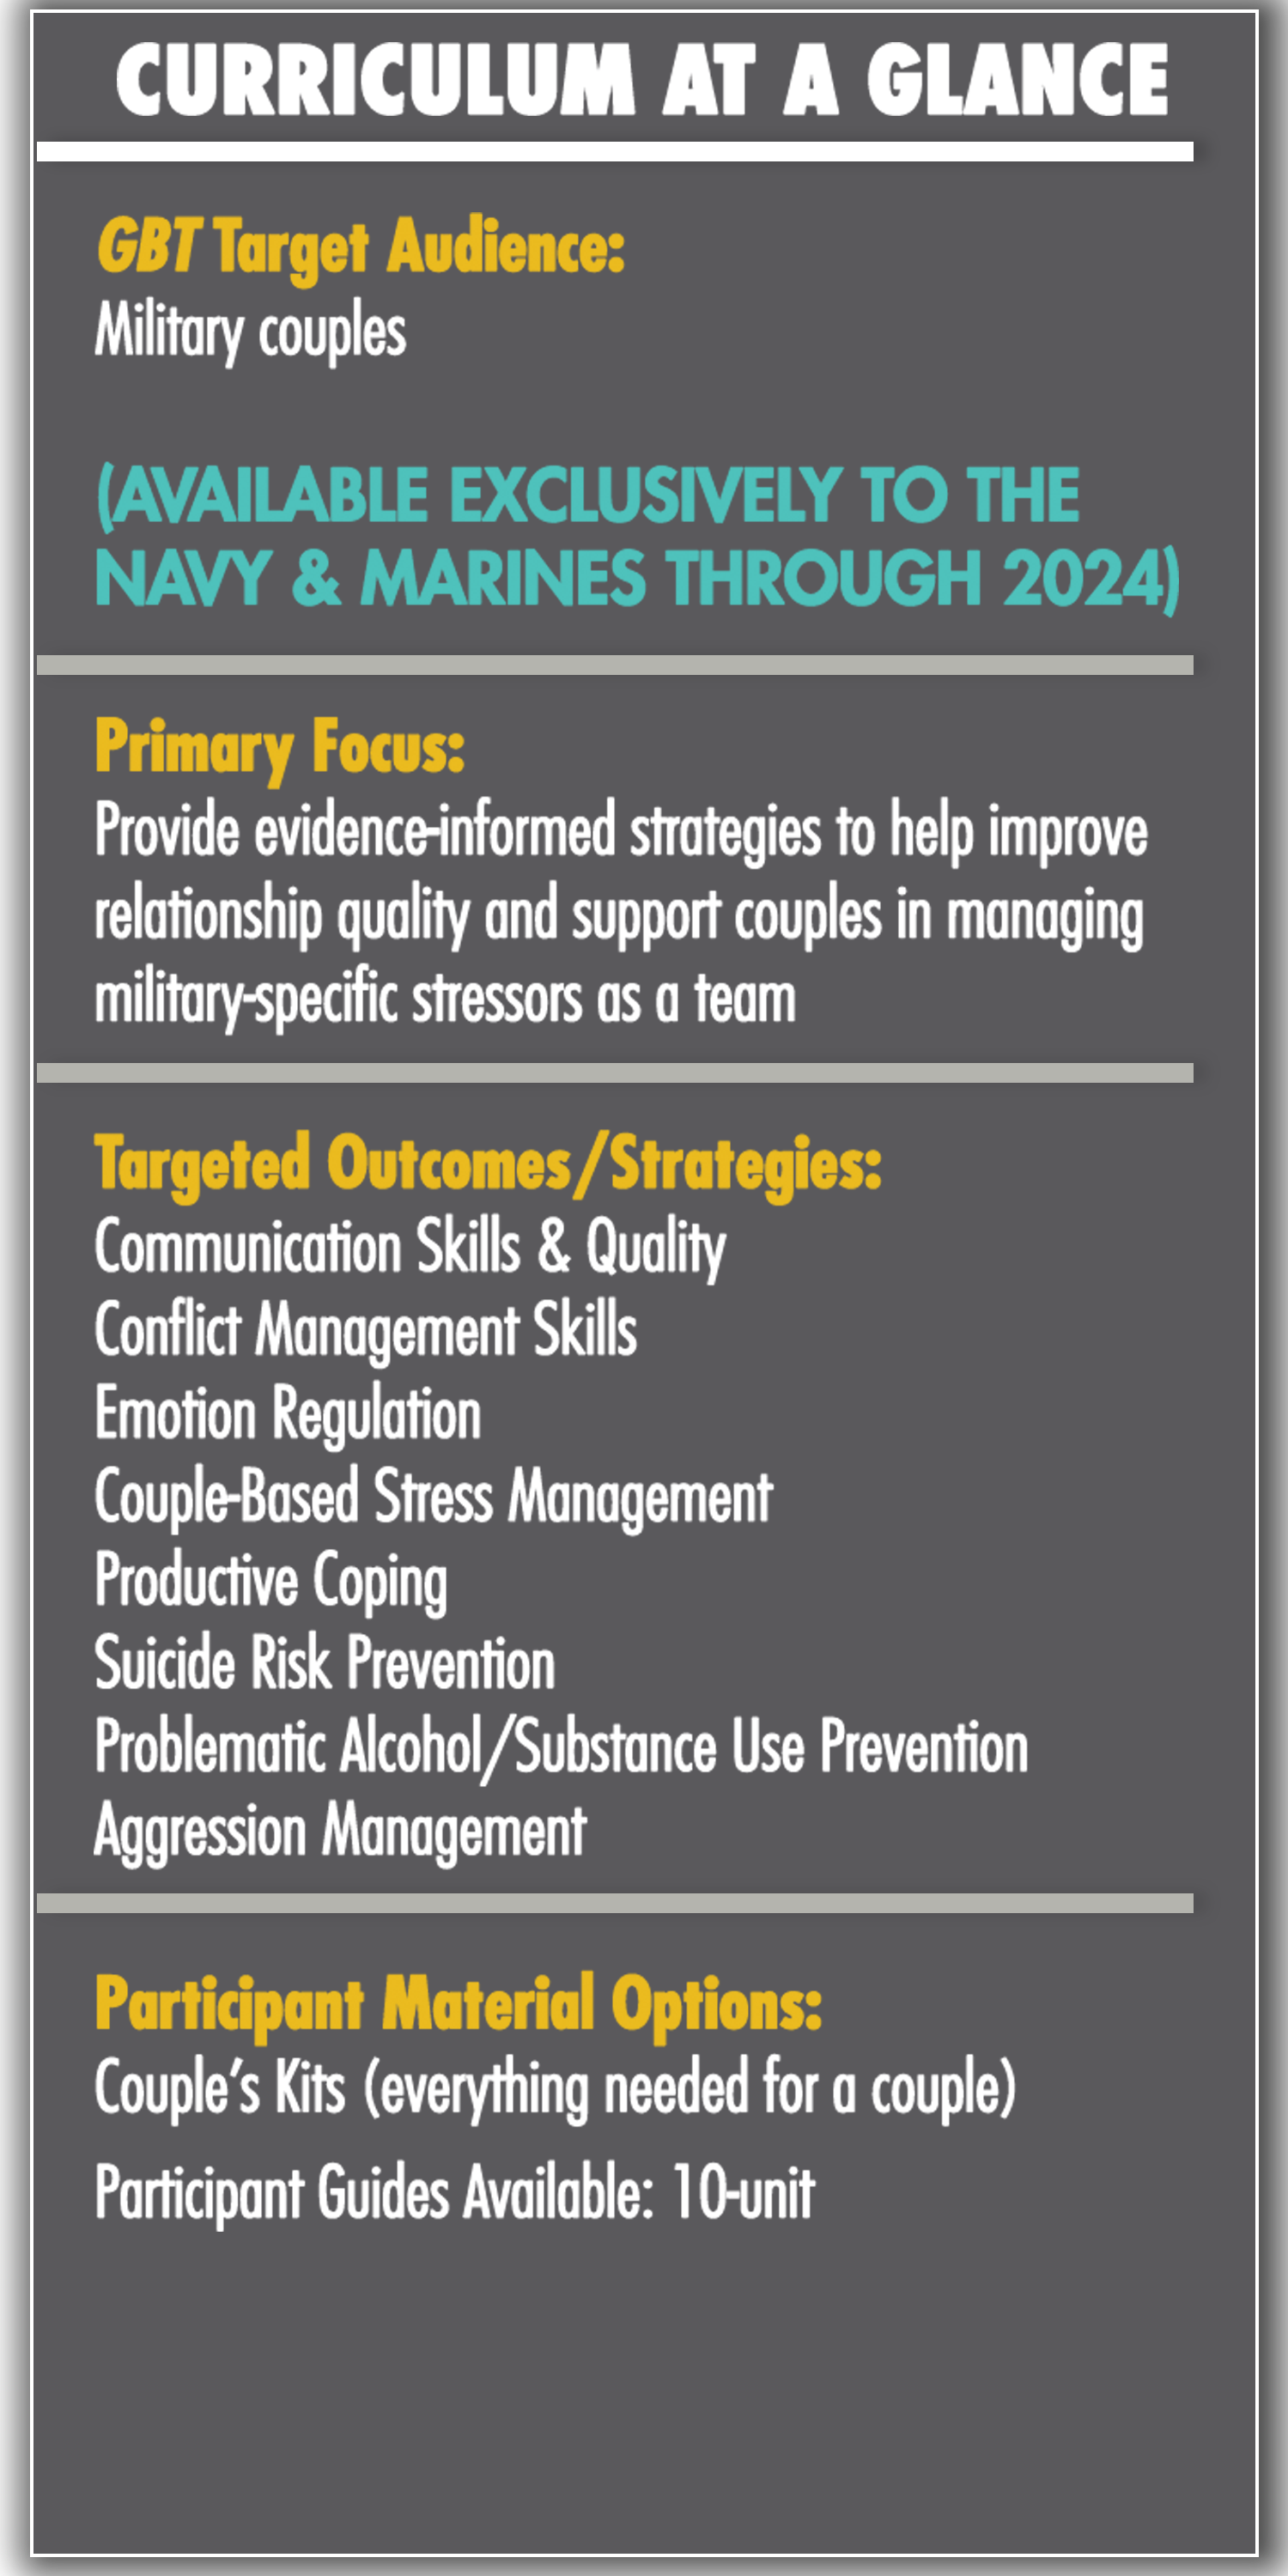 GBT Target Audience:  Military couples  (Available EXCLUSIVELY to the Navy & Marines through 2024)  Primary Focus:  Provide evidence-informed strategies to help improve relationship quality and support couples in managing military-specific stressors as a team   Targeted Outcomes/Strategies: Communication Skills & Quality Conflict Management Skills Emotion Regulation  Couple-Based Stress Management  Productive Coping  Suicide Risk Prevention  Problematic Alcohol/Substance Use Prevention  Aggression Management   Participant Material Options: Couple’s Kits (everything needed for a couple) Participant Guides Available: 10-unit